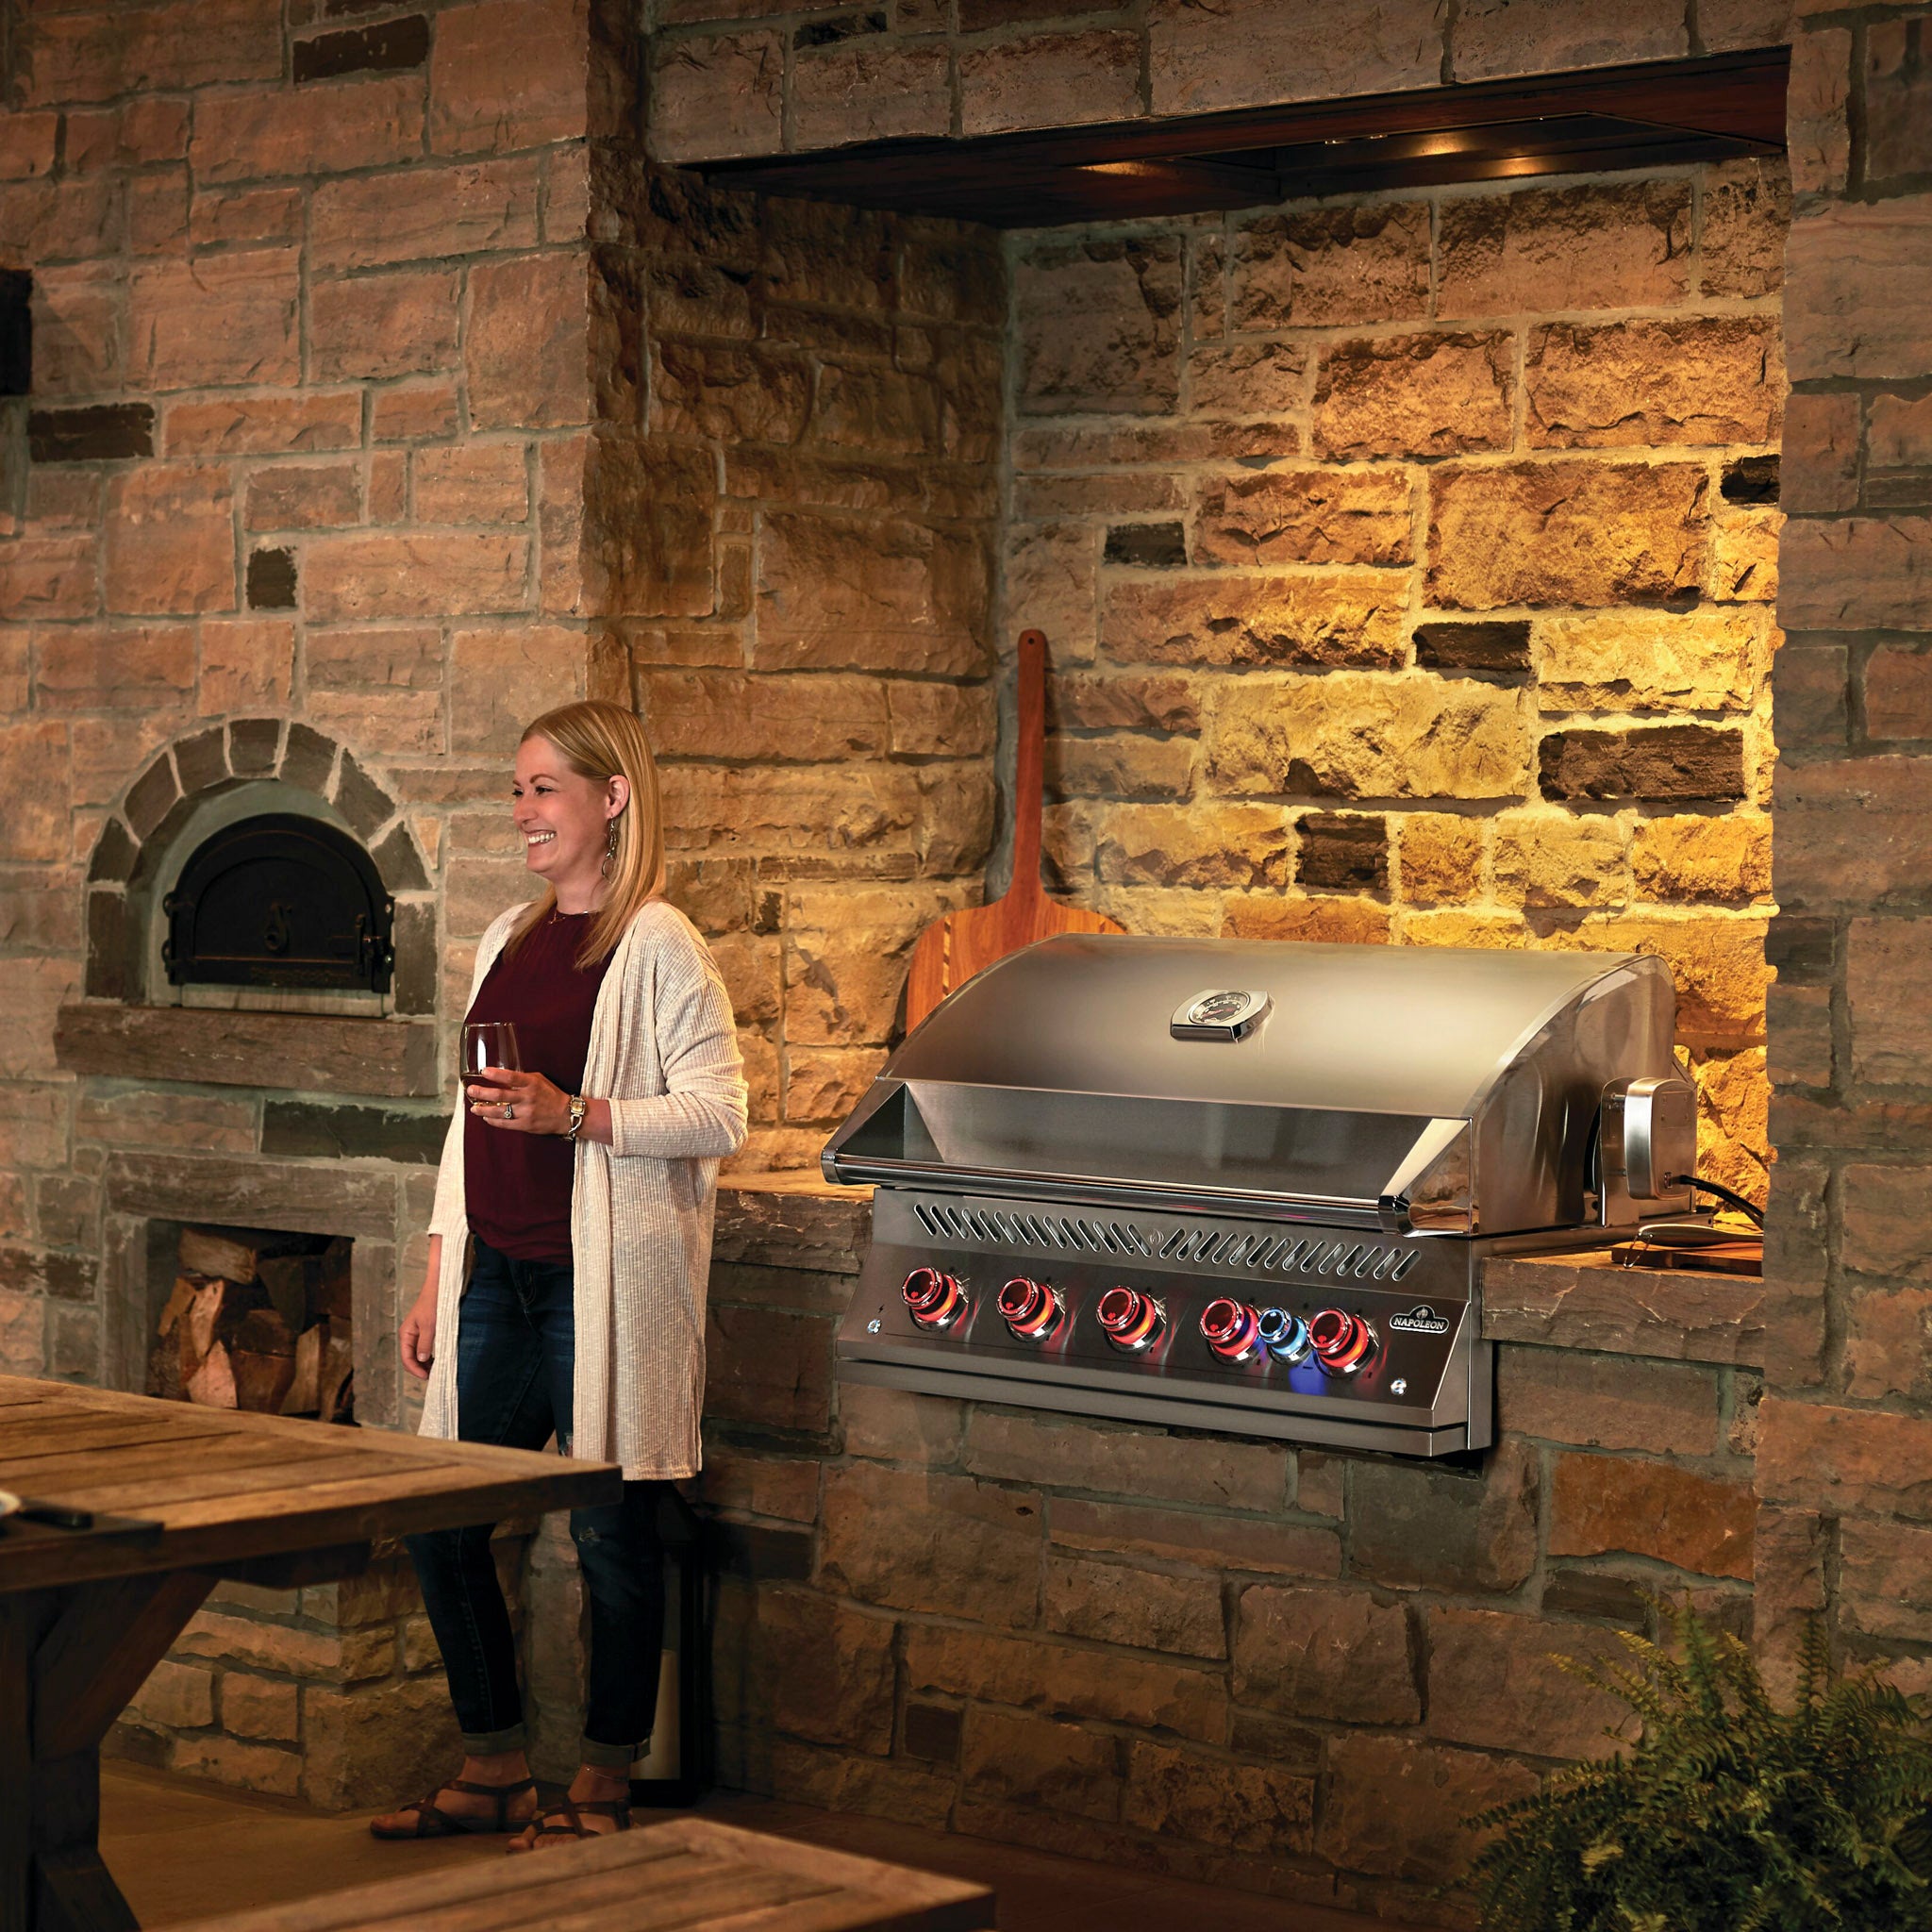 Napoleon 700 Series 38" Built-in Gas Grill